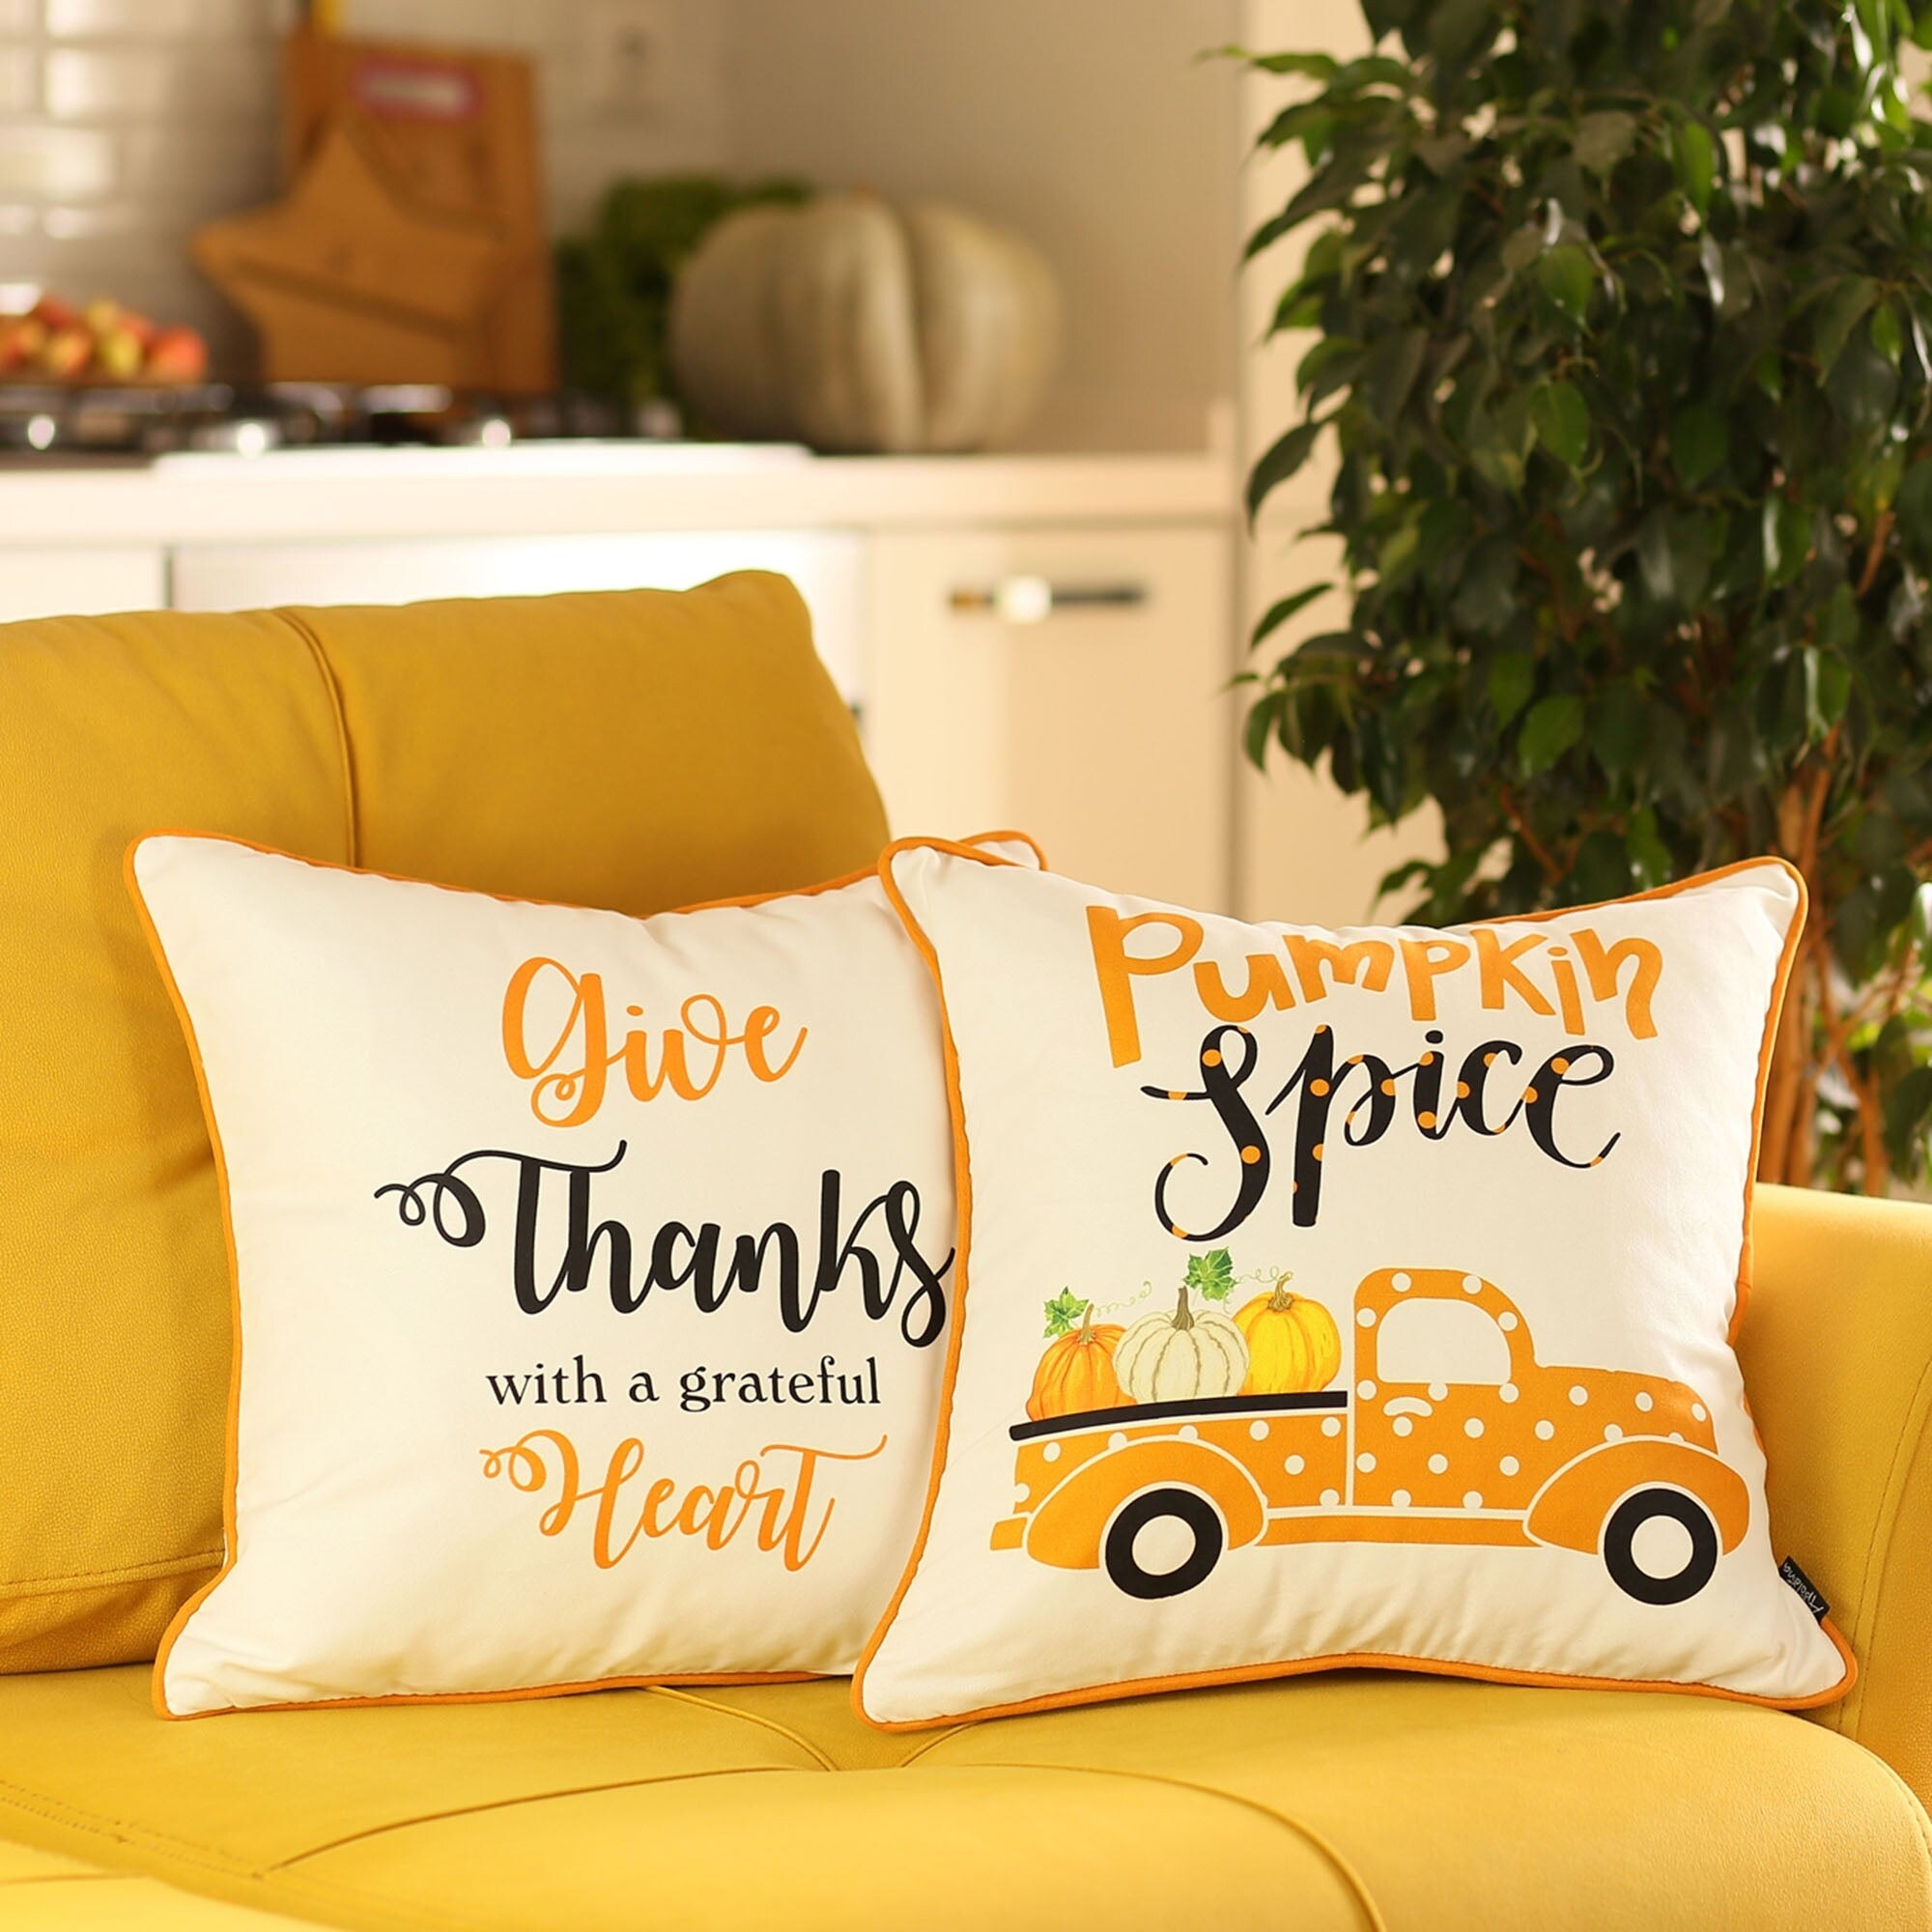 https://ak1.ostkcdn.com/images/products/is/images/direct/e825921114590264f7ebd24ef9c1110190dc1a9b/Decorative-Fall-Thanksgiving-Throw-Pillow-Cover-Pumpkin-Truck-Set-of-2.jpg